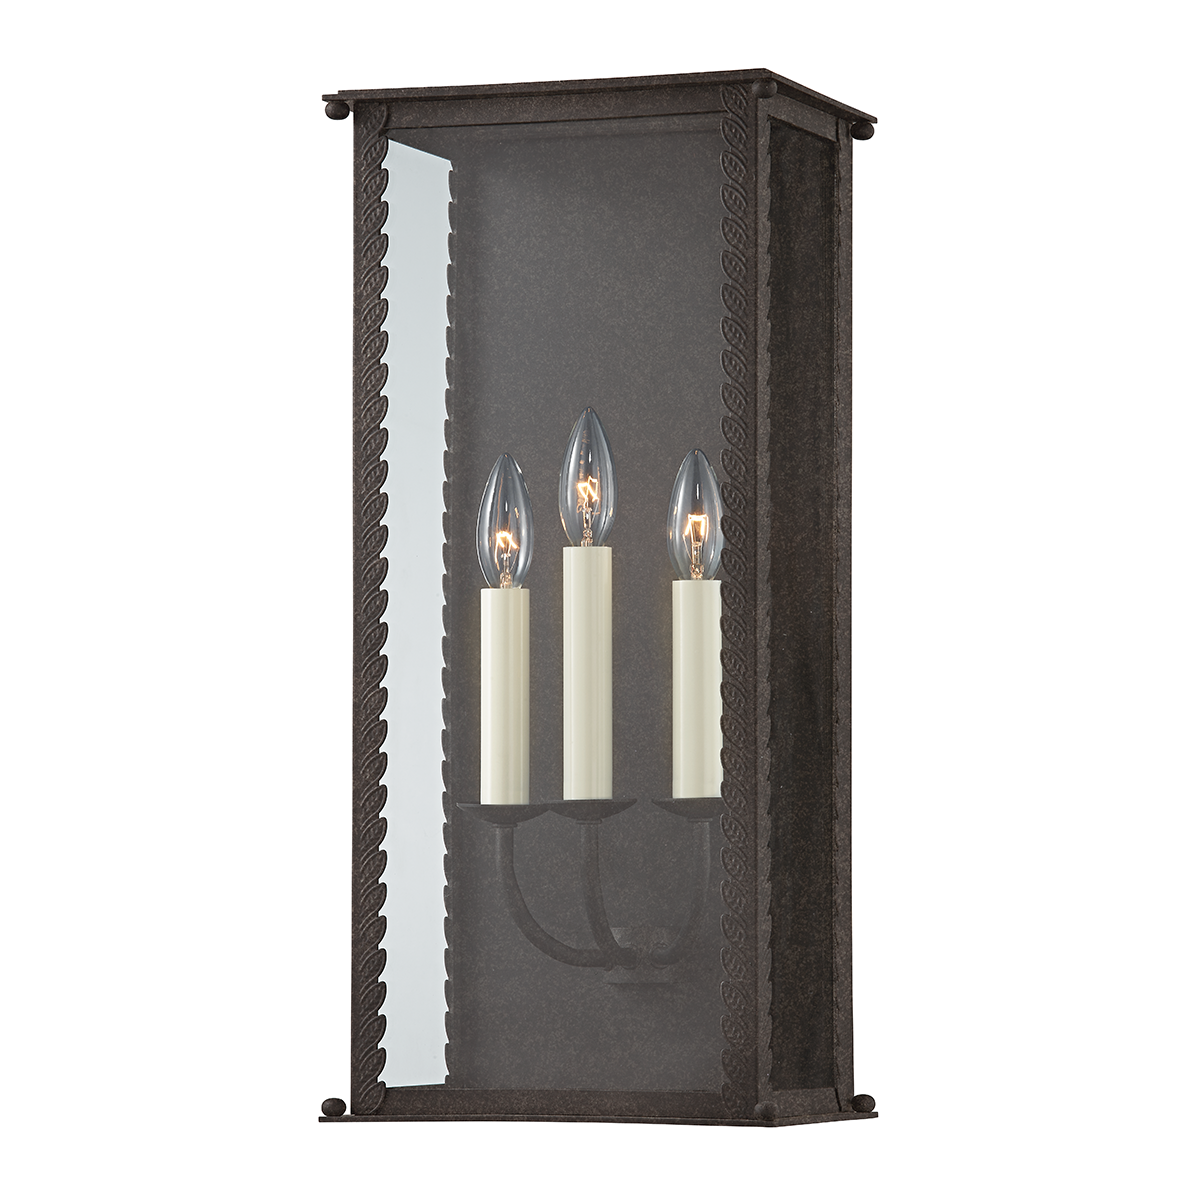 Troy Lighting 3 LIGHT LARGE EXTERIOR WALL SCONCE B6713 Outdoor l Wall Troy Lighting FRENCH IRON  